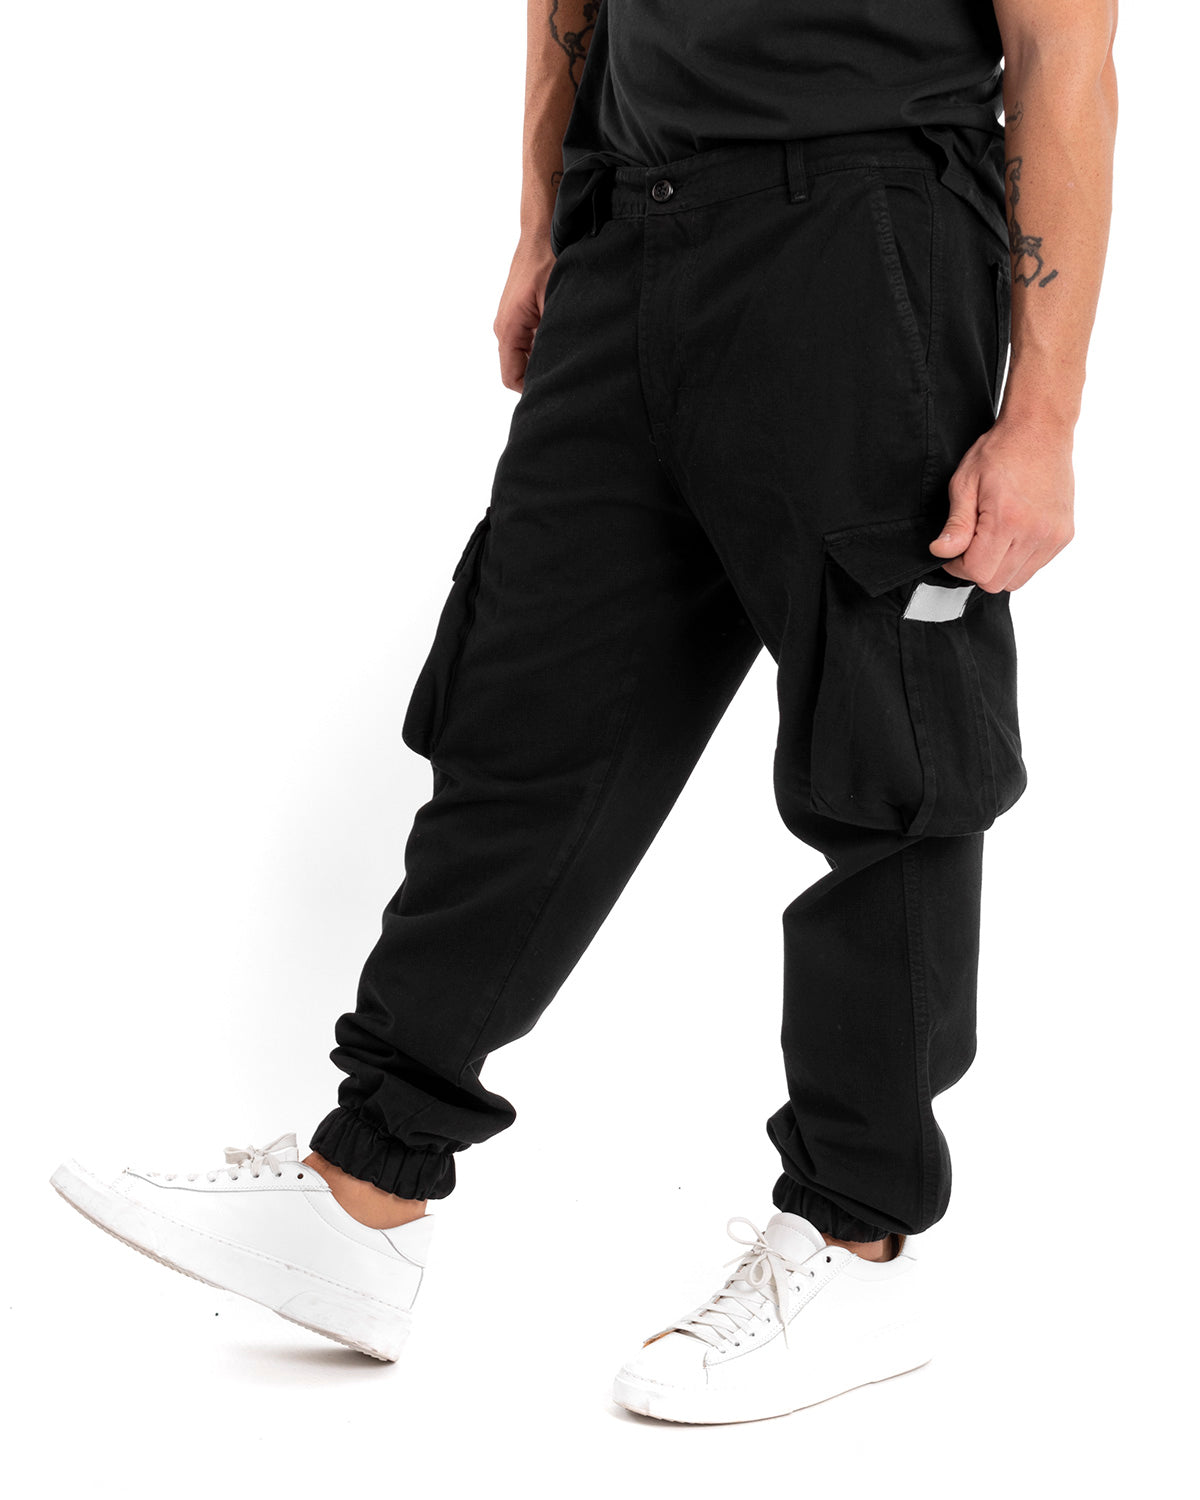 Men's Long Cargo Pants with Pockets Solid Color Black Casual GIOSAL